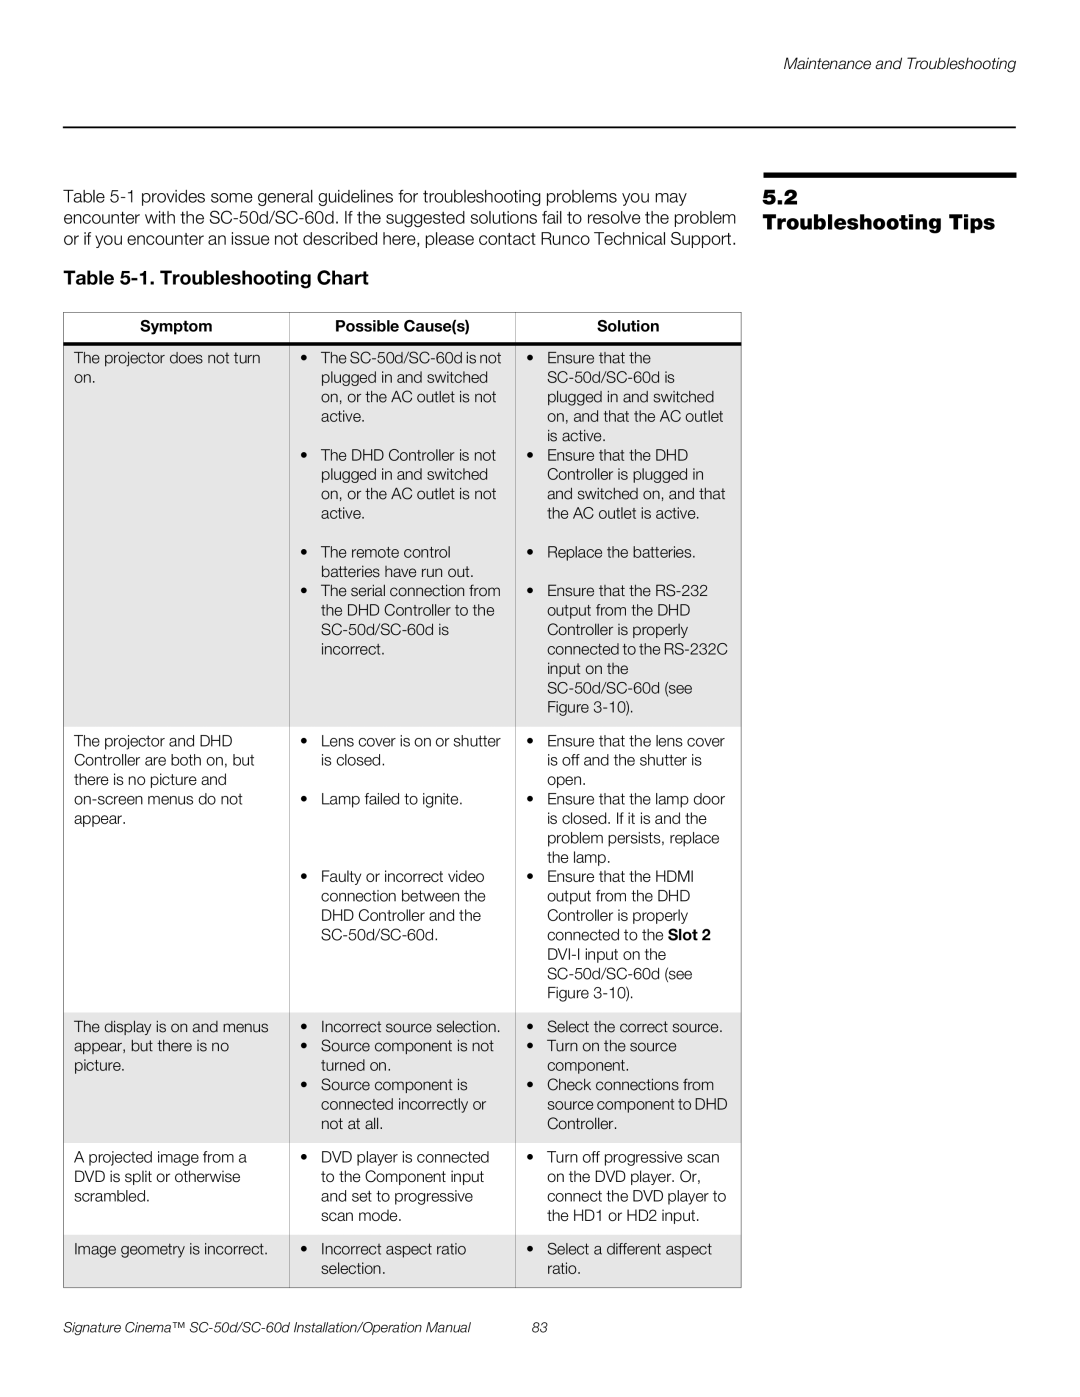 Runco SC-50D Troubleshooting Tips, 1.Troubleshooting Chart, Maintenance and Troubleshooting, Symptom, Possible Causes 